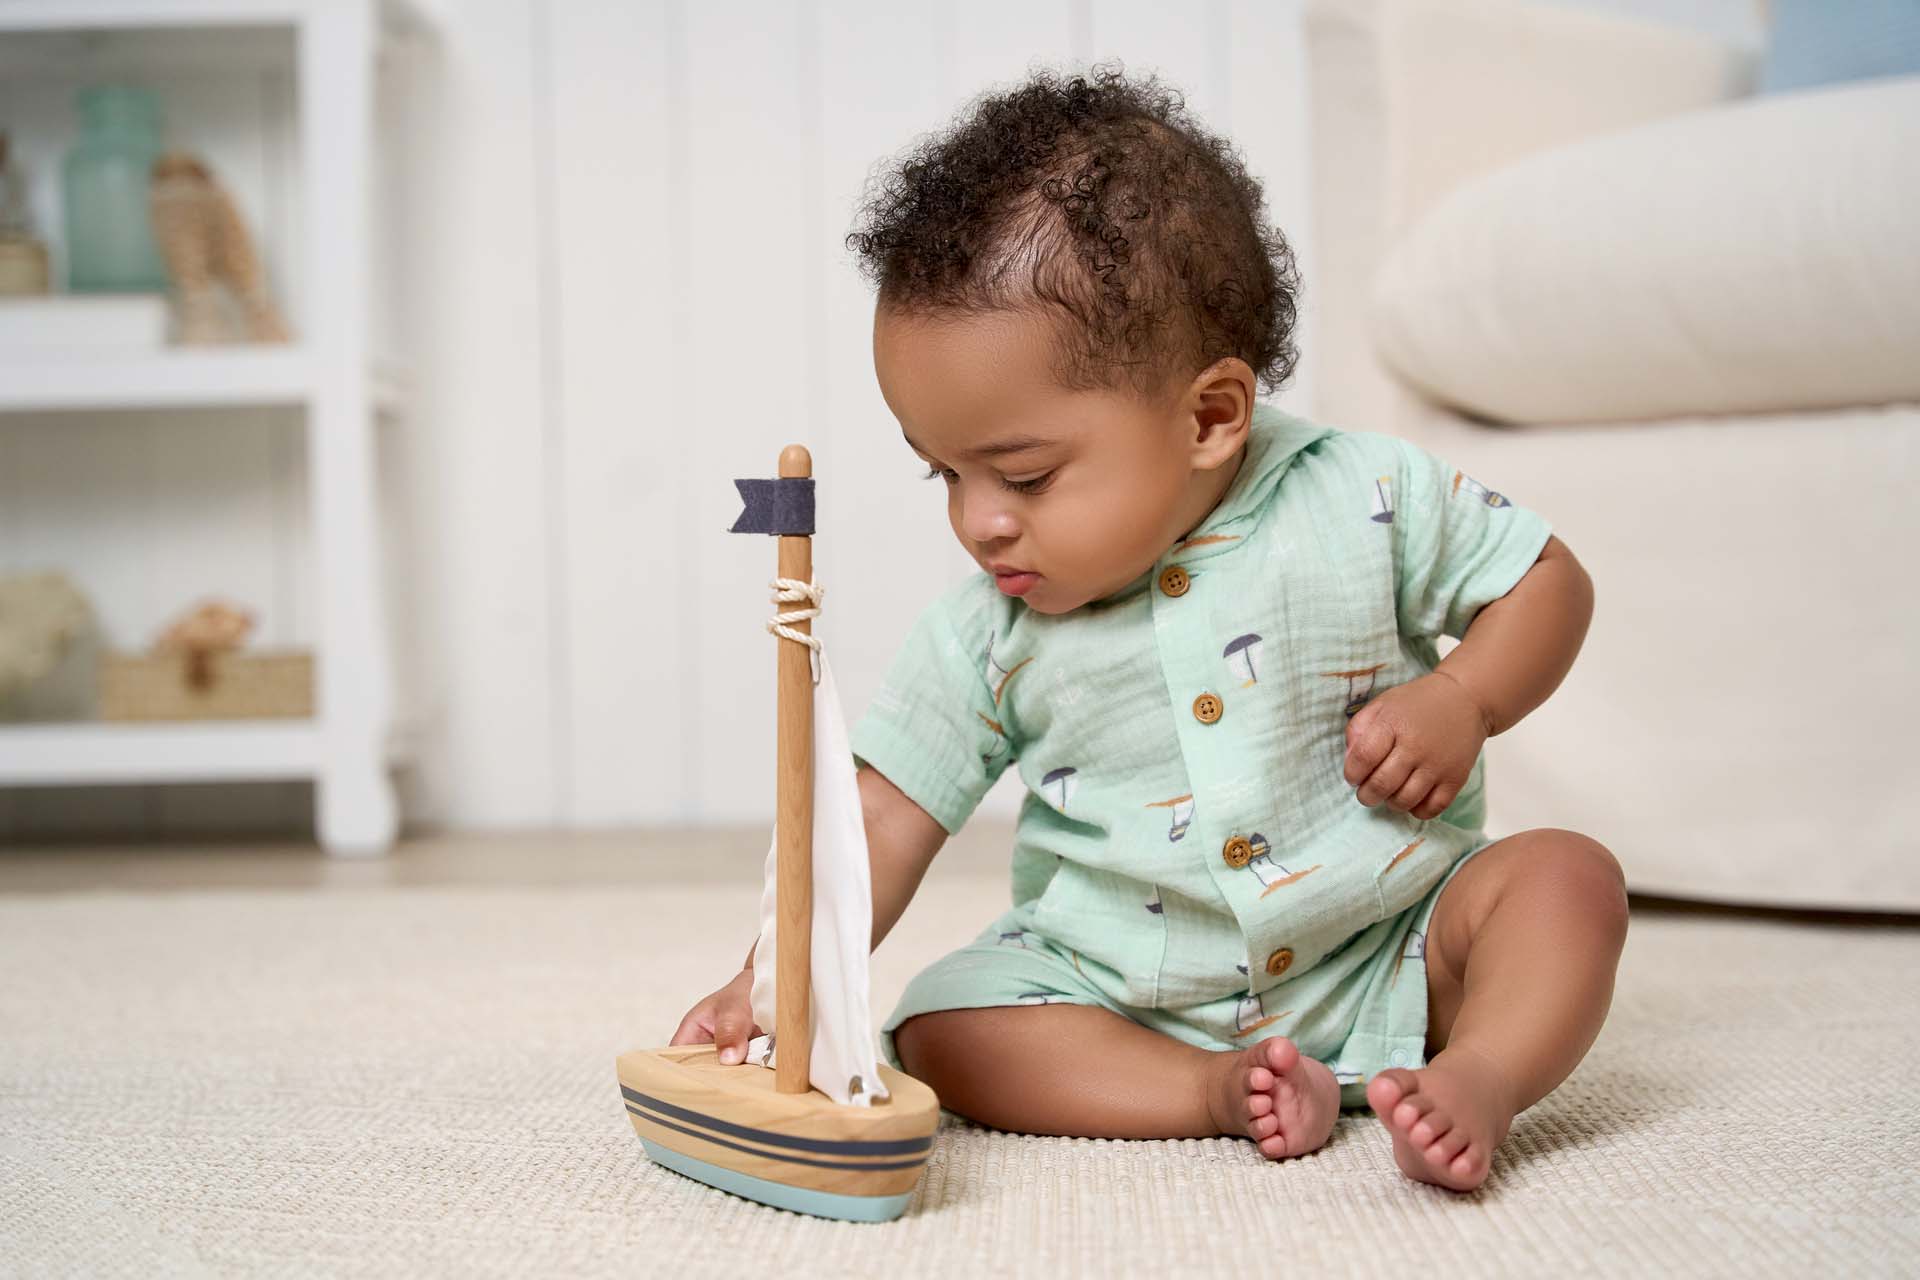 A baby boy wearing a sailboat patterned romper examines a wooden toy boat in a living room.